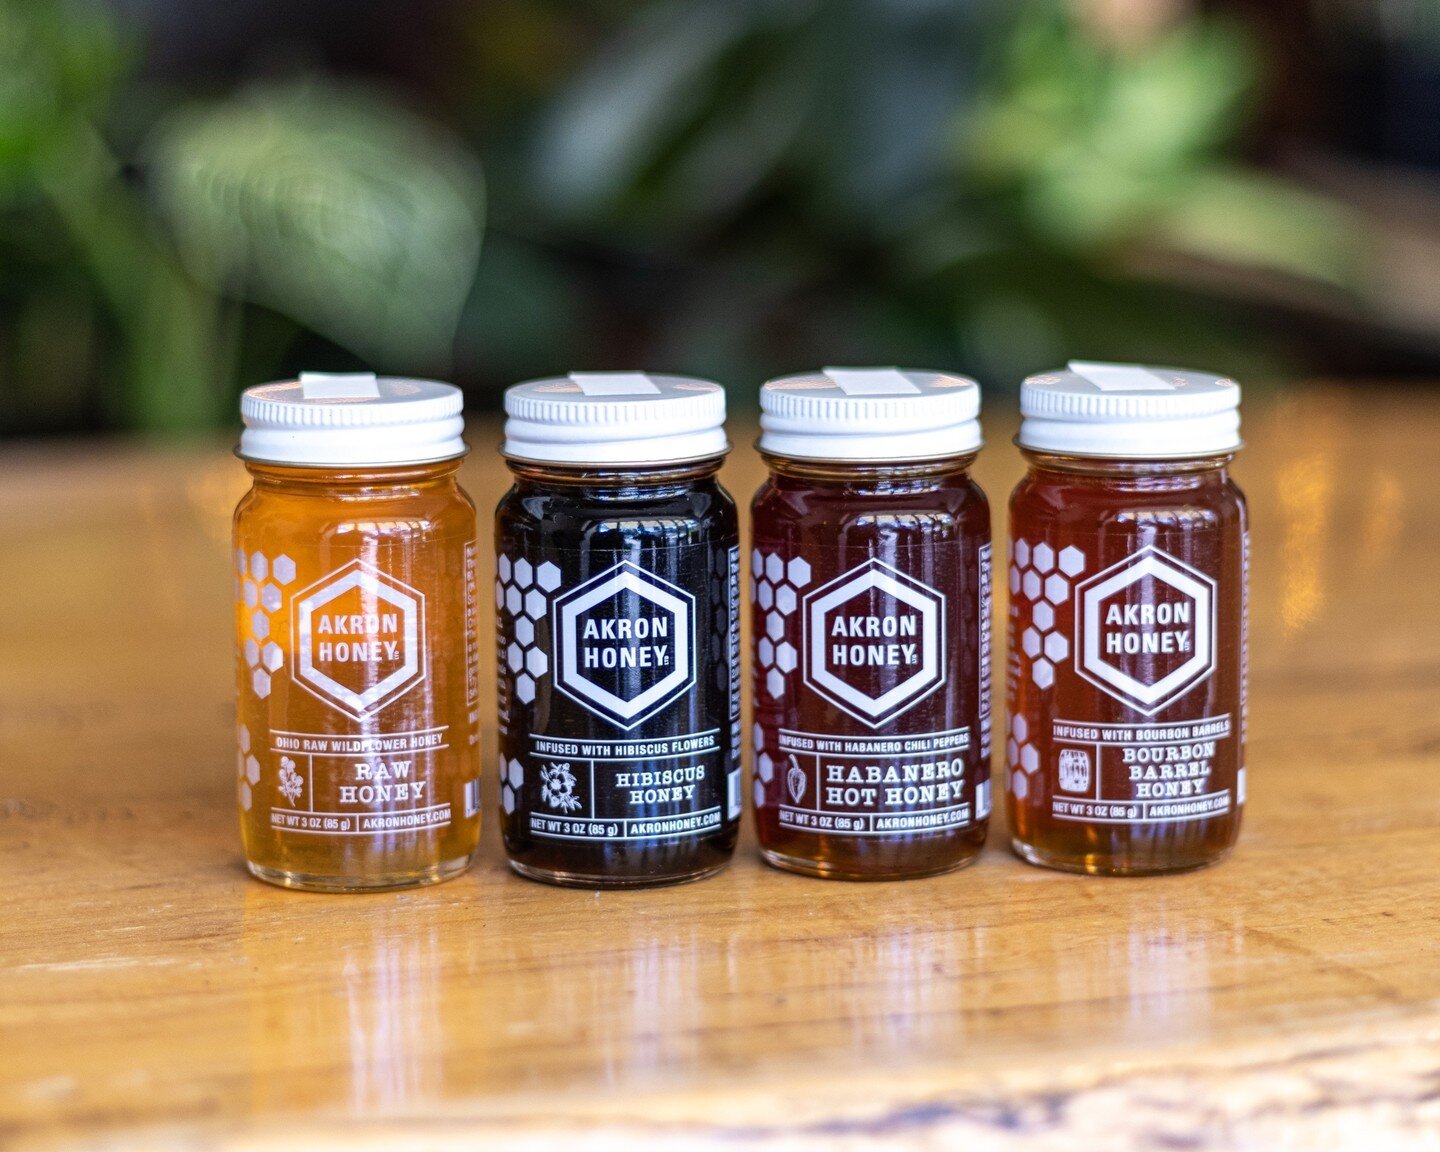 In case you missed it &mdash; we're now carrying 3oz jars of @akronhoney at all of our caf&eacute;s for you to pick up and take home 🐝🍯🧸. ⁠
⁠
Highly recommended: haba&ntilde;ero hot honey on the lemon scone.⁠
⁠
Also! You can add Akron Honey's raw 